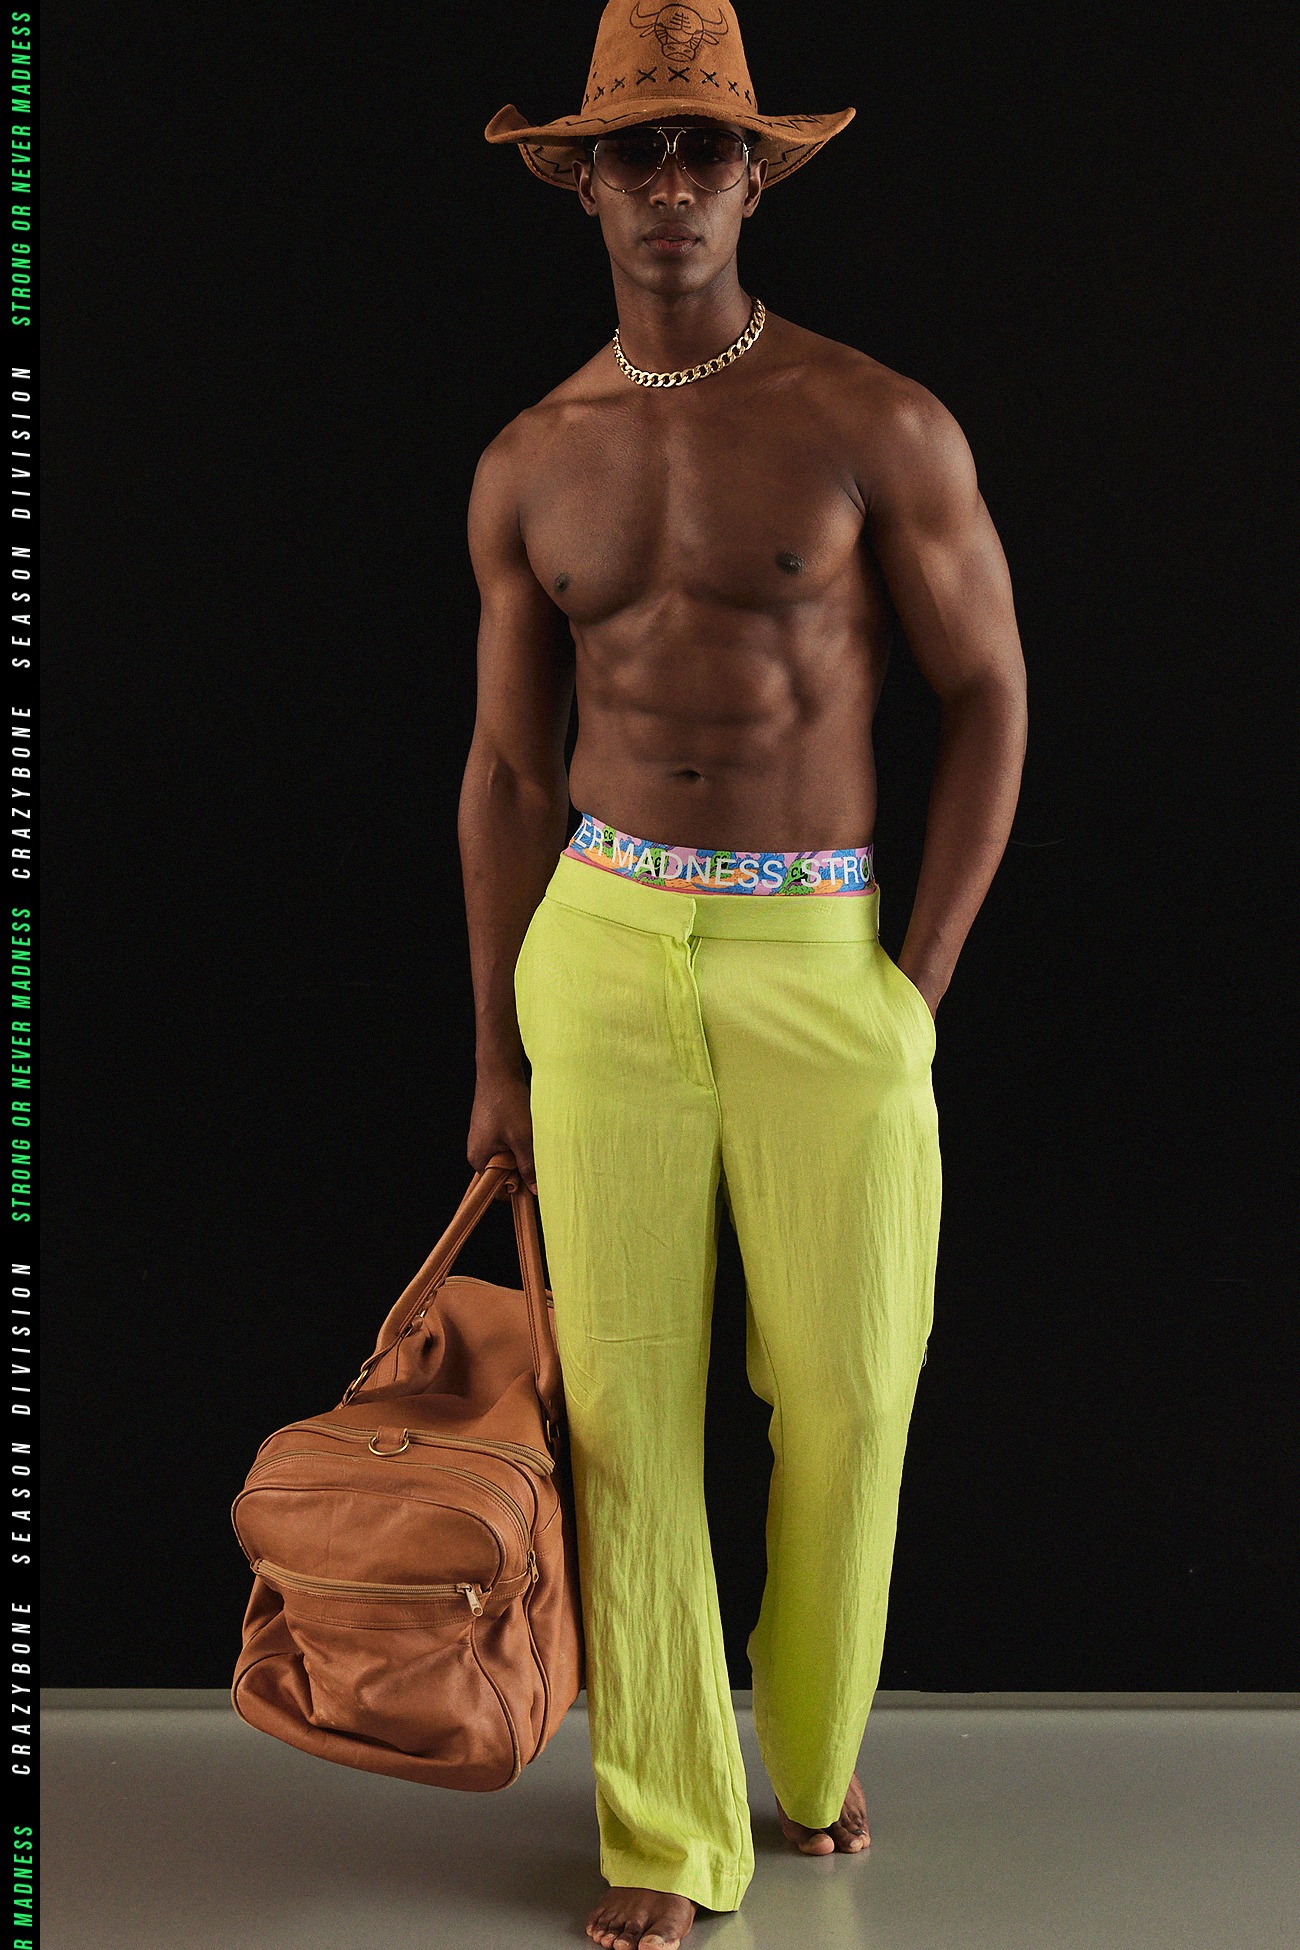 5.0 AIRFLEX BOXER-BRIEF - SWEET VACATION [MINT]